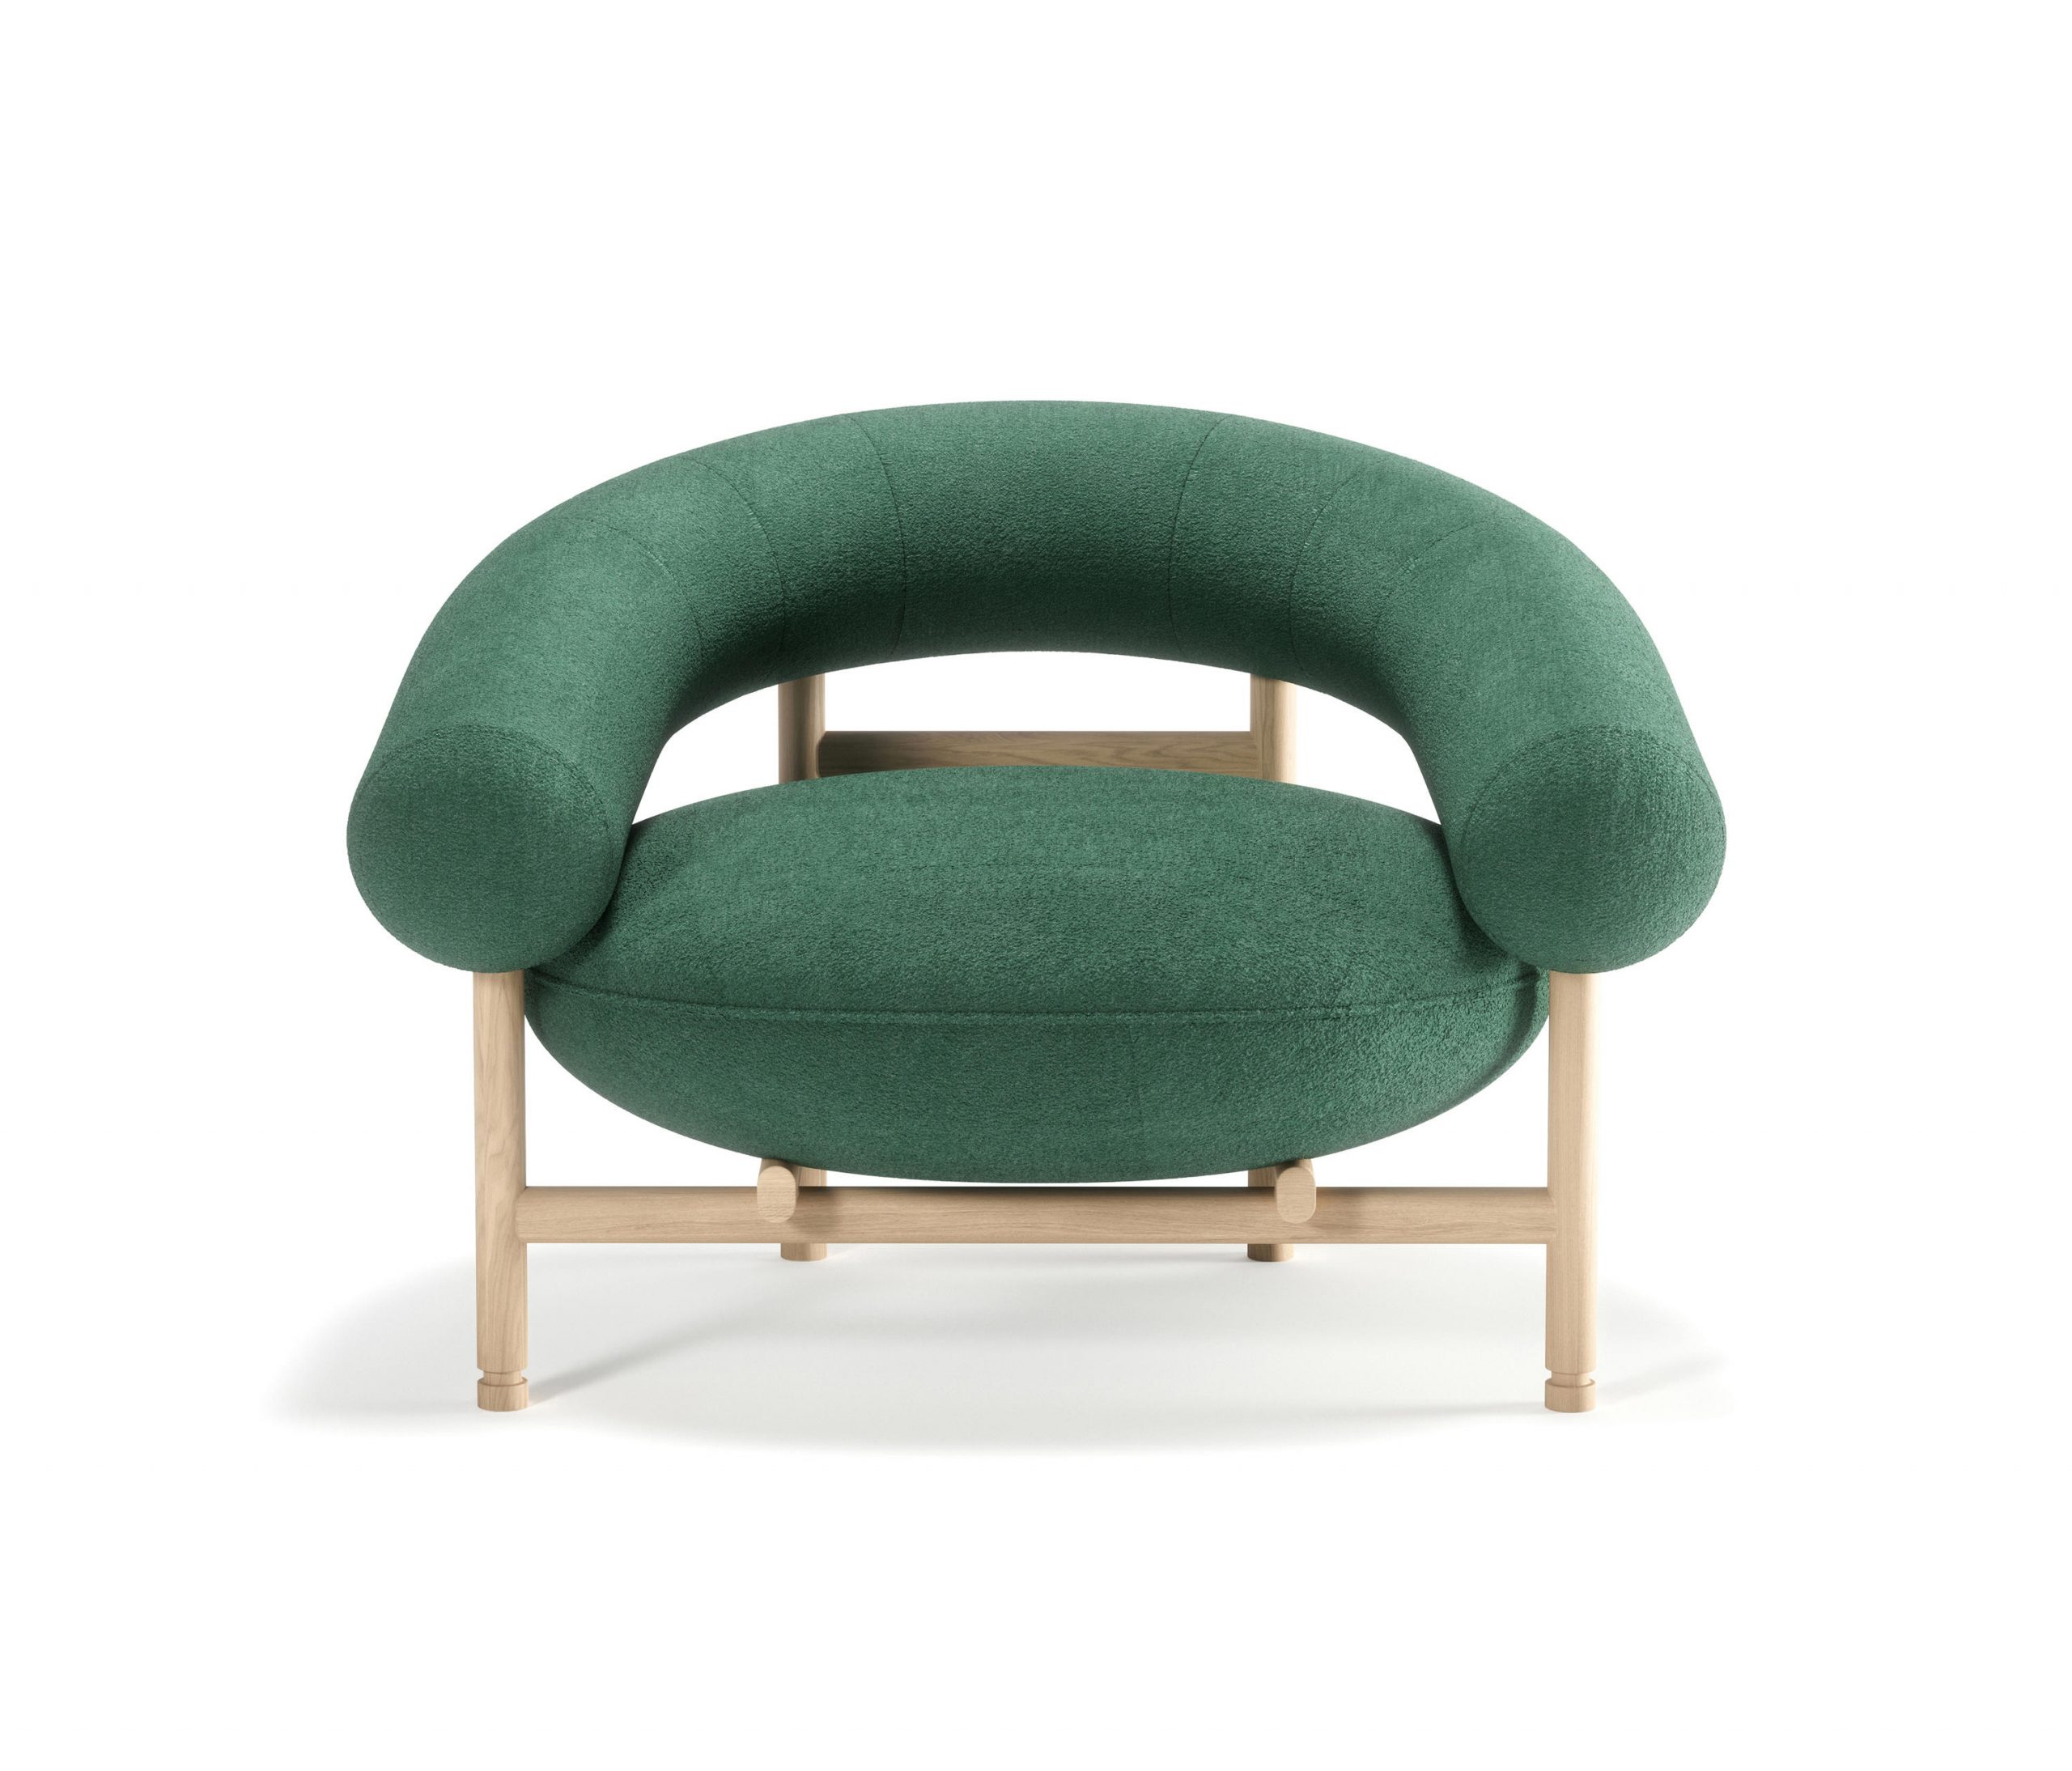 Loop Lounge Chair by David Girelli for Wewood